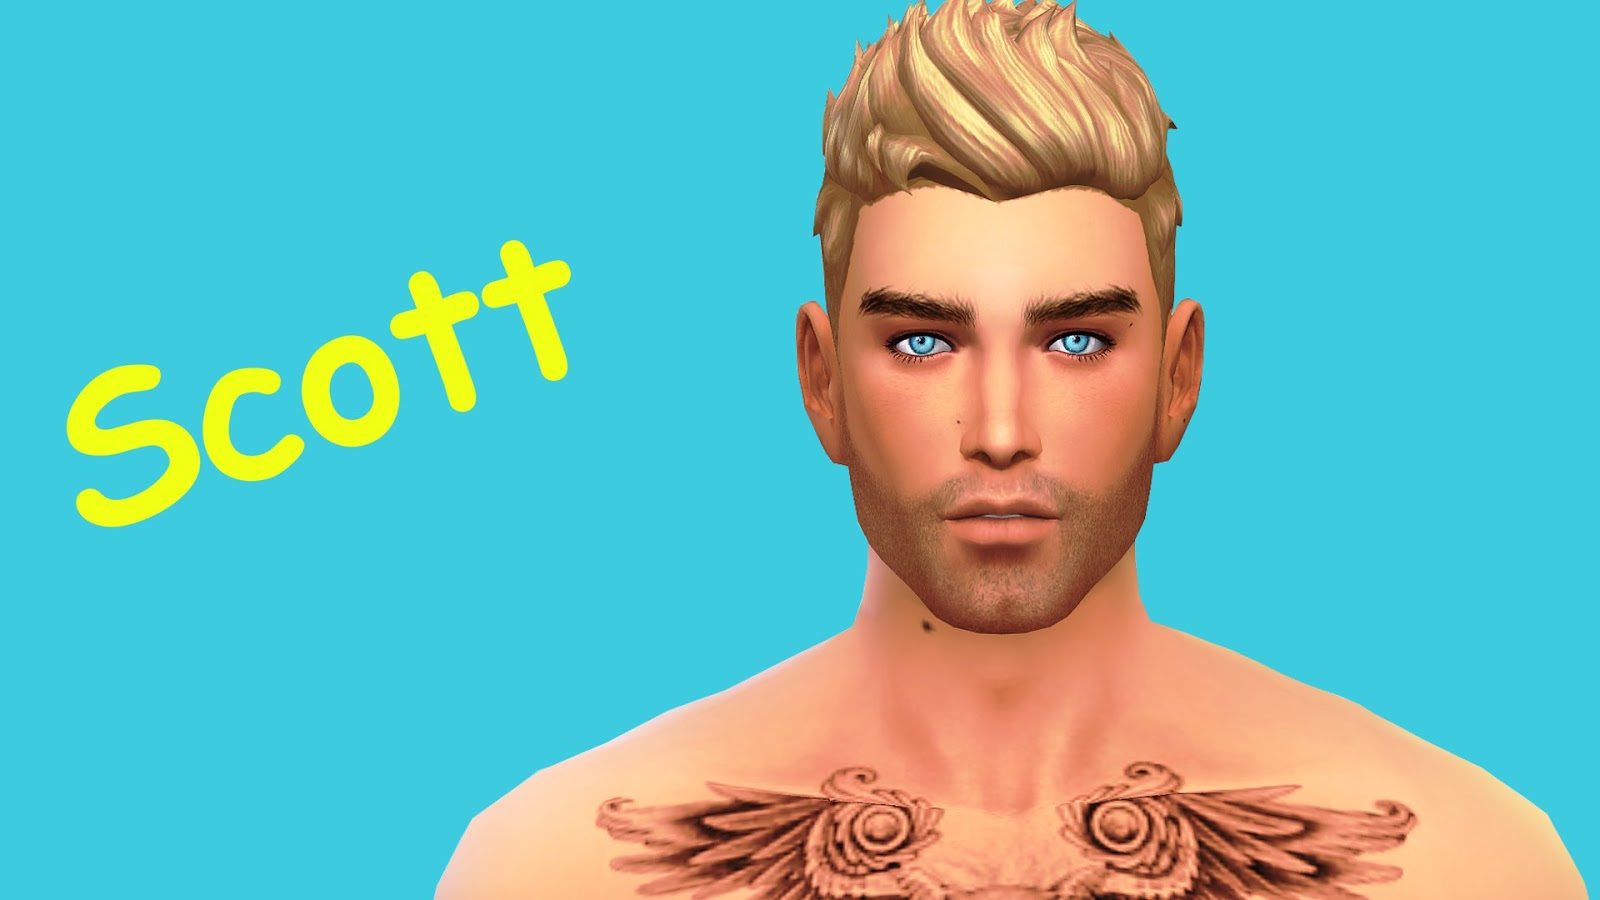 Sims 4 male sims - beautylord